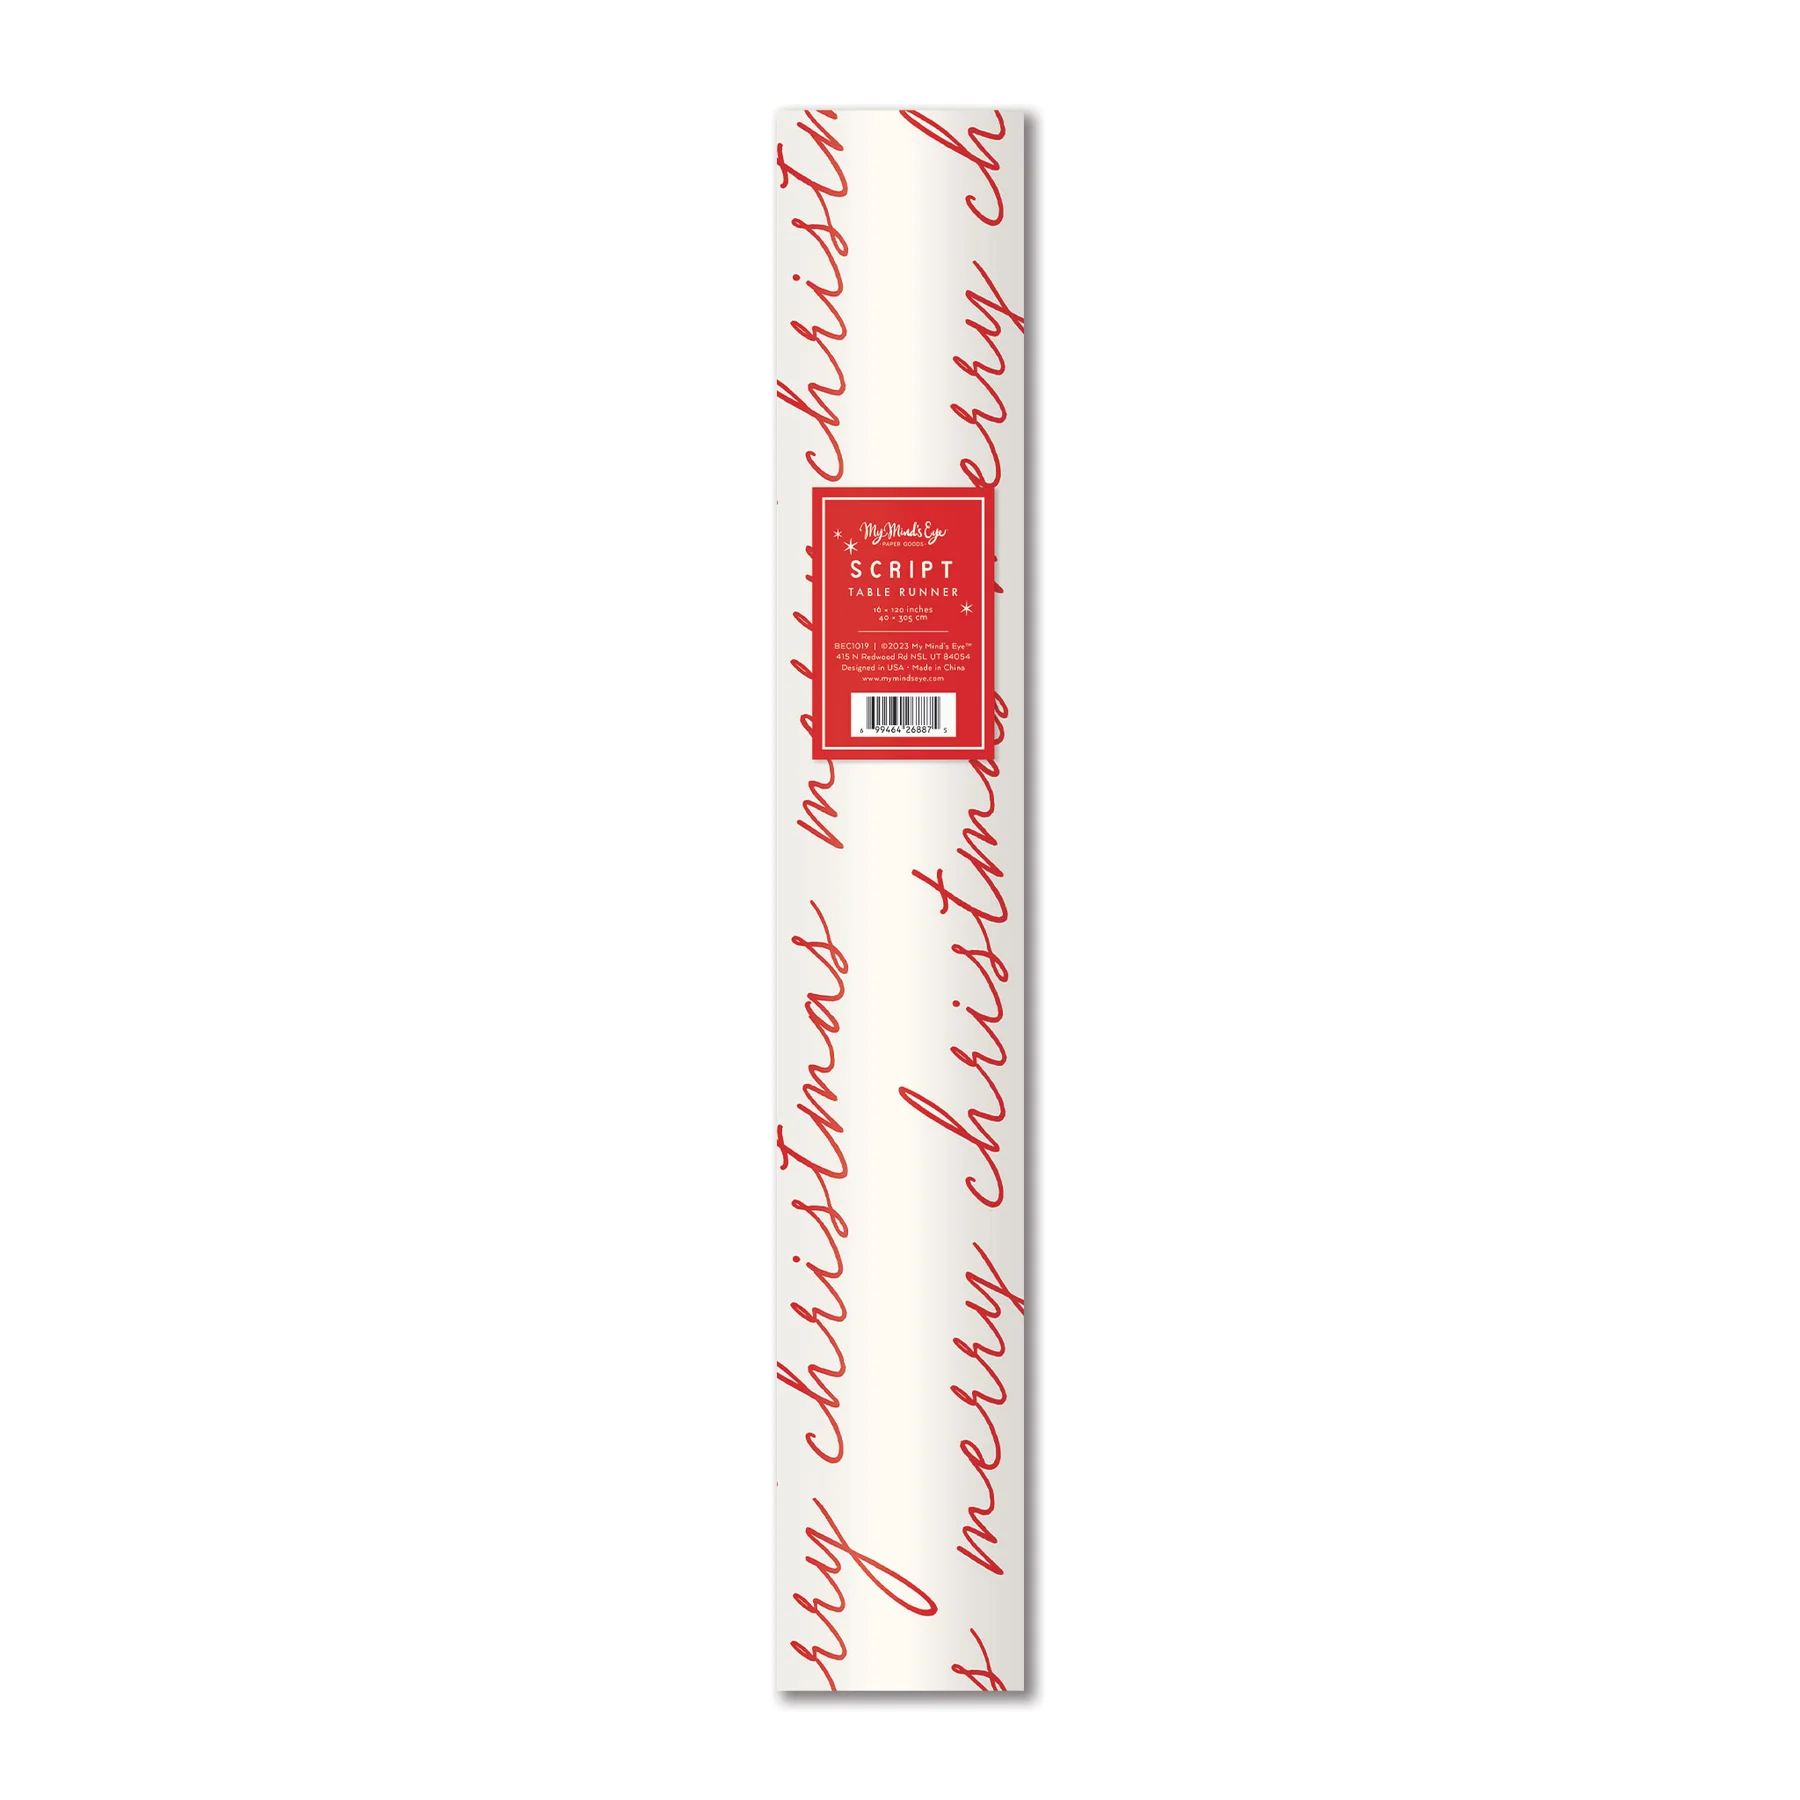 PRESALE SHIPPING MID OCTOBER - BEC1019 - BELIEVE MERRY CHRISTMAS SCRIPT PAPER TABLE RUNNER